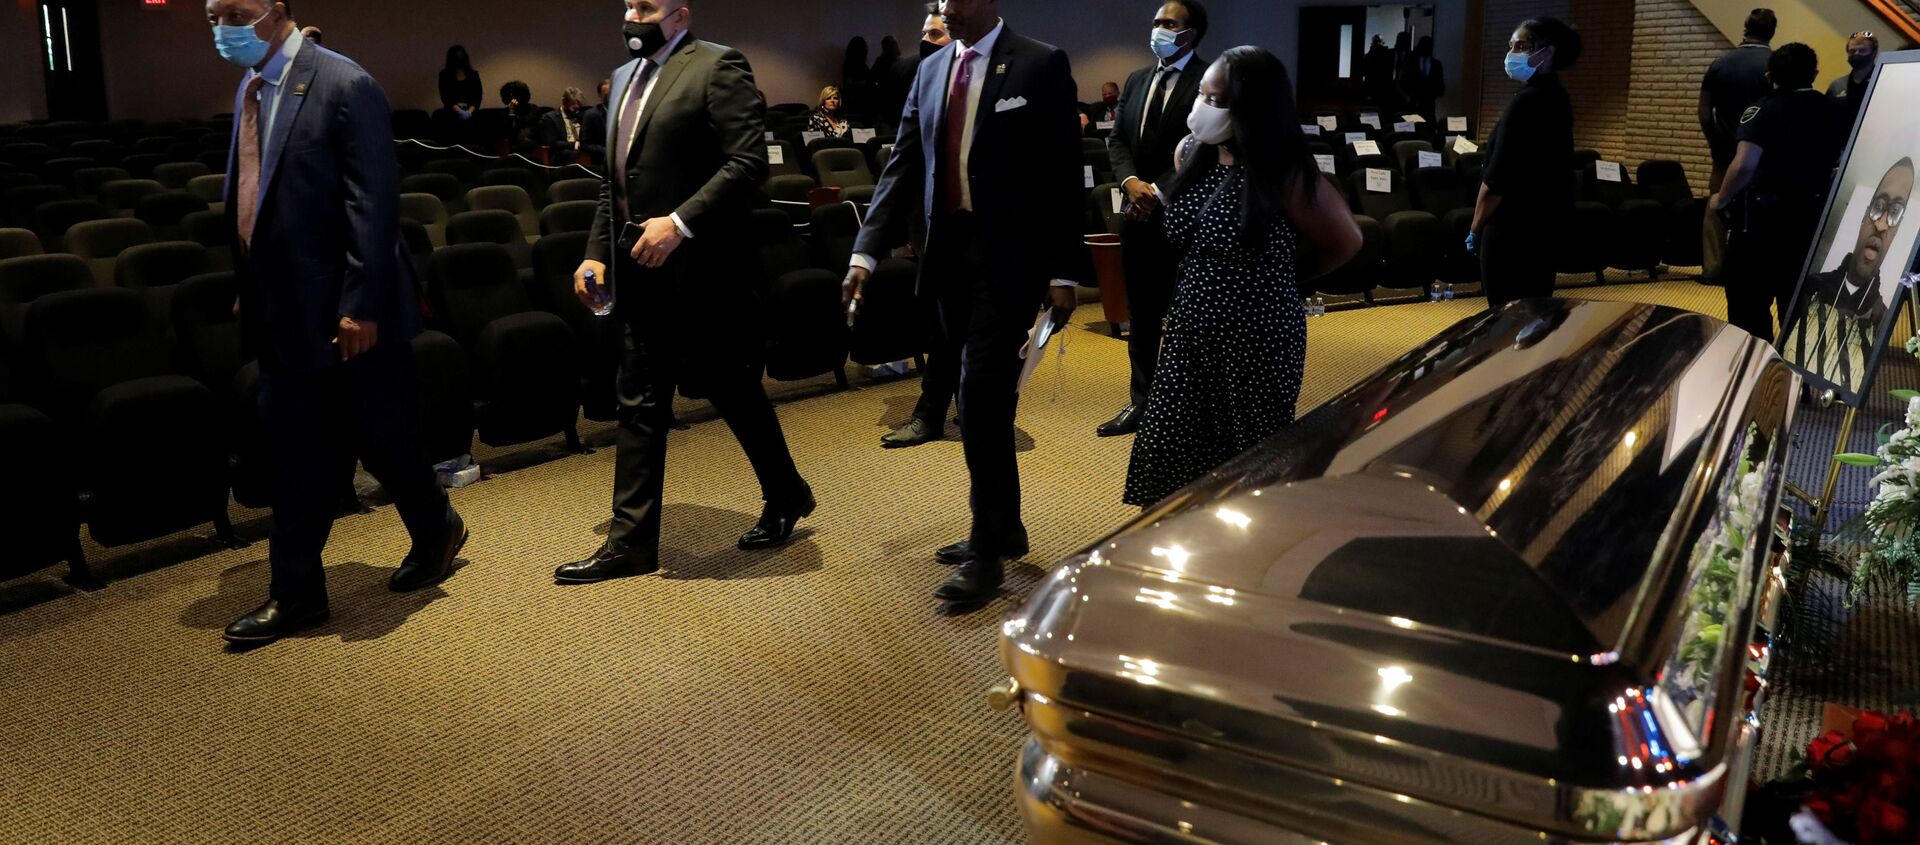 Civil rights activist Reverend Jesse Jackson is seen during a memorial service for George Floyd following his death in Minneapolis police custody, in Minneapolis, in Minneapolis, U.S., June 4, 2020. REUTERS/Lucas Jackson - Sputnik International, 1920, 13.04.2021